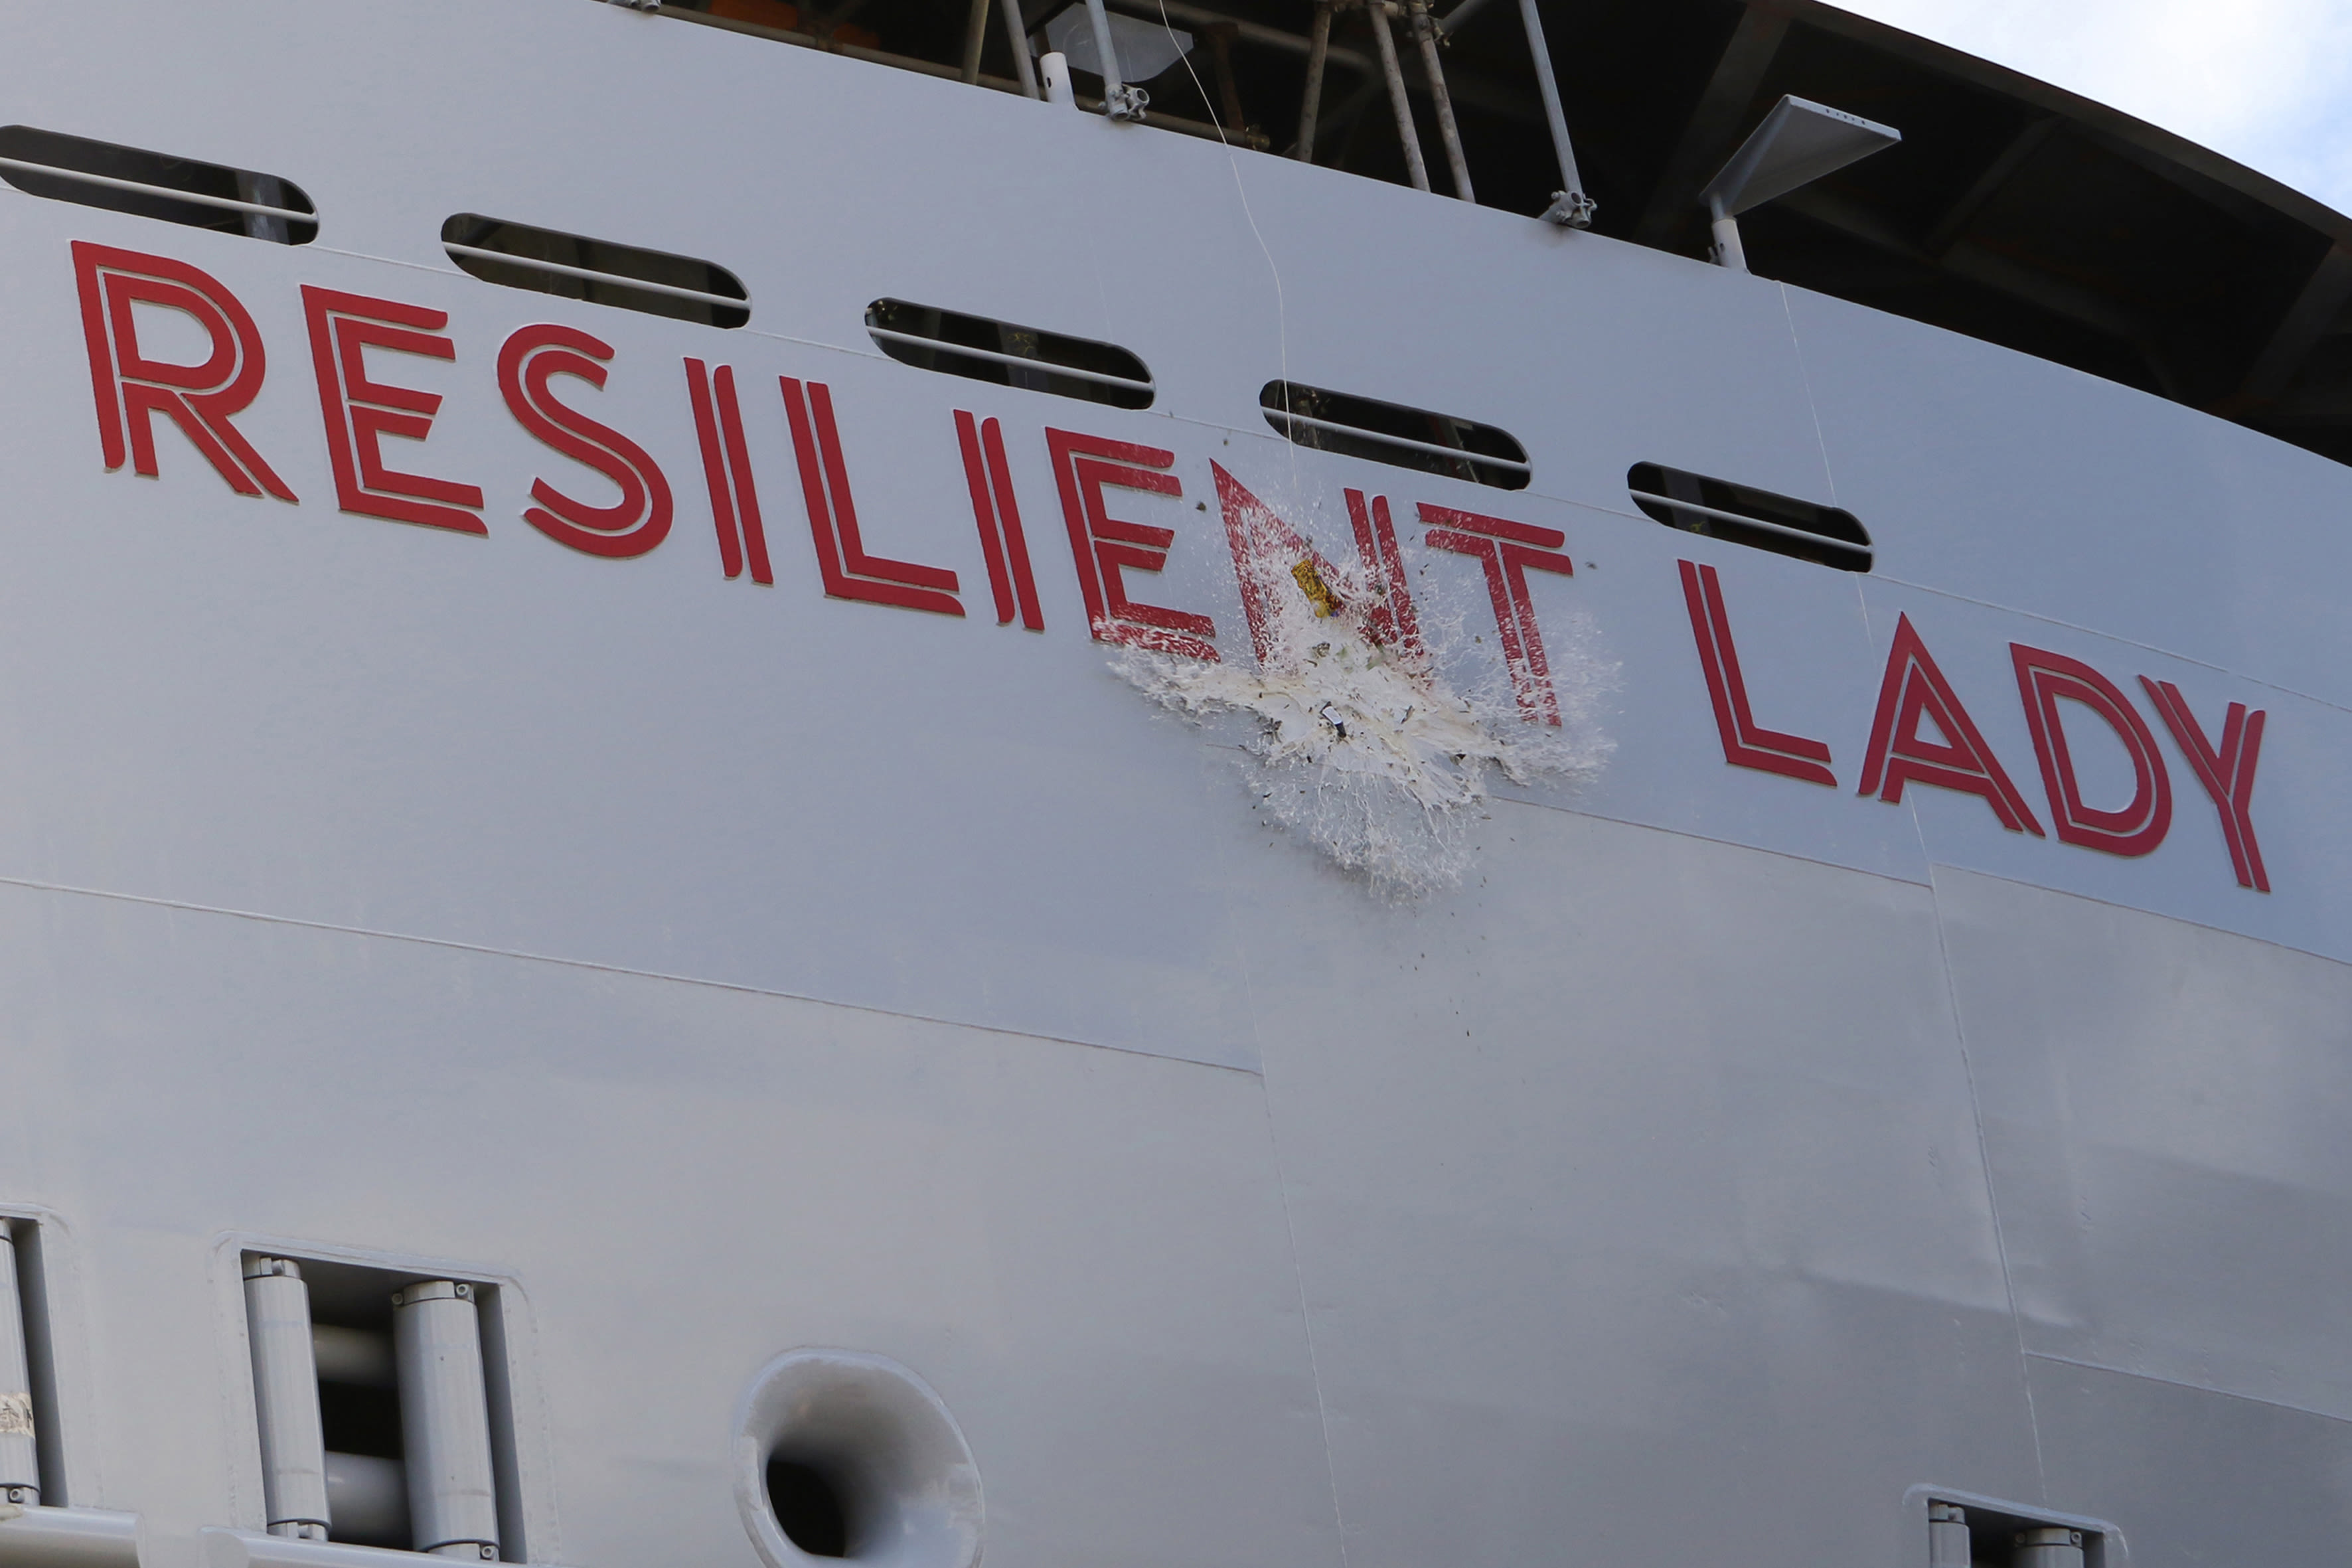 A bottle of champagne smashing on the side of Virgin Voyages' Resilient Lady ship